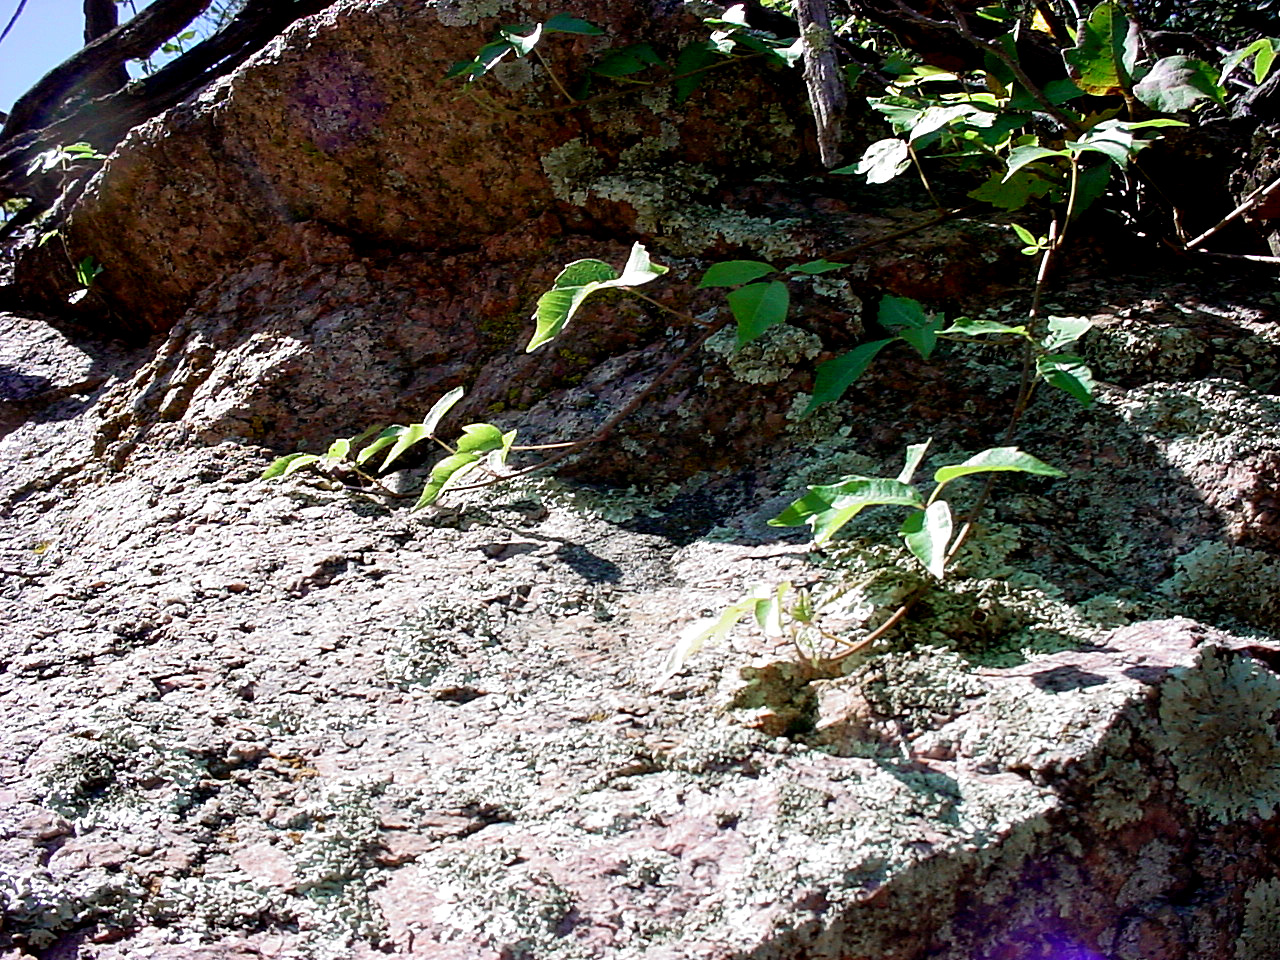 Trifoliate leaves and viney growth habit of poison ivy